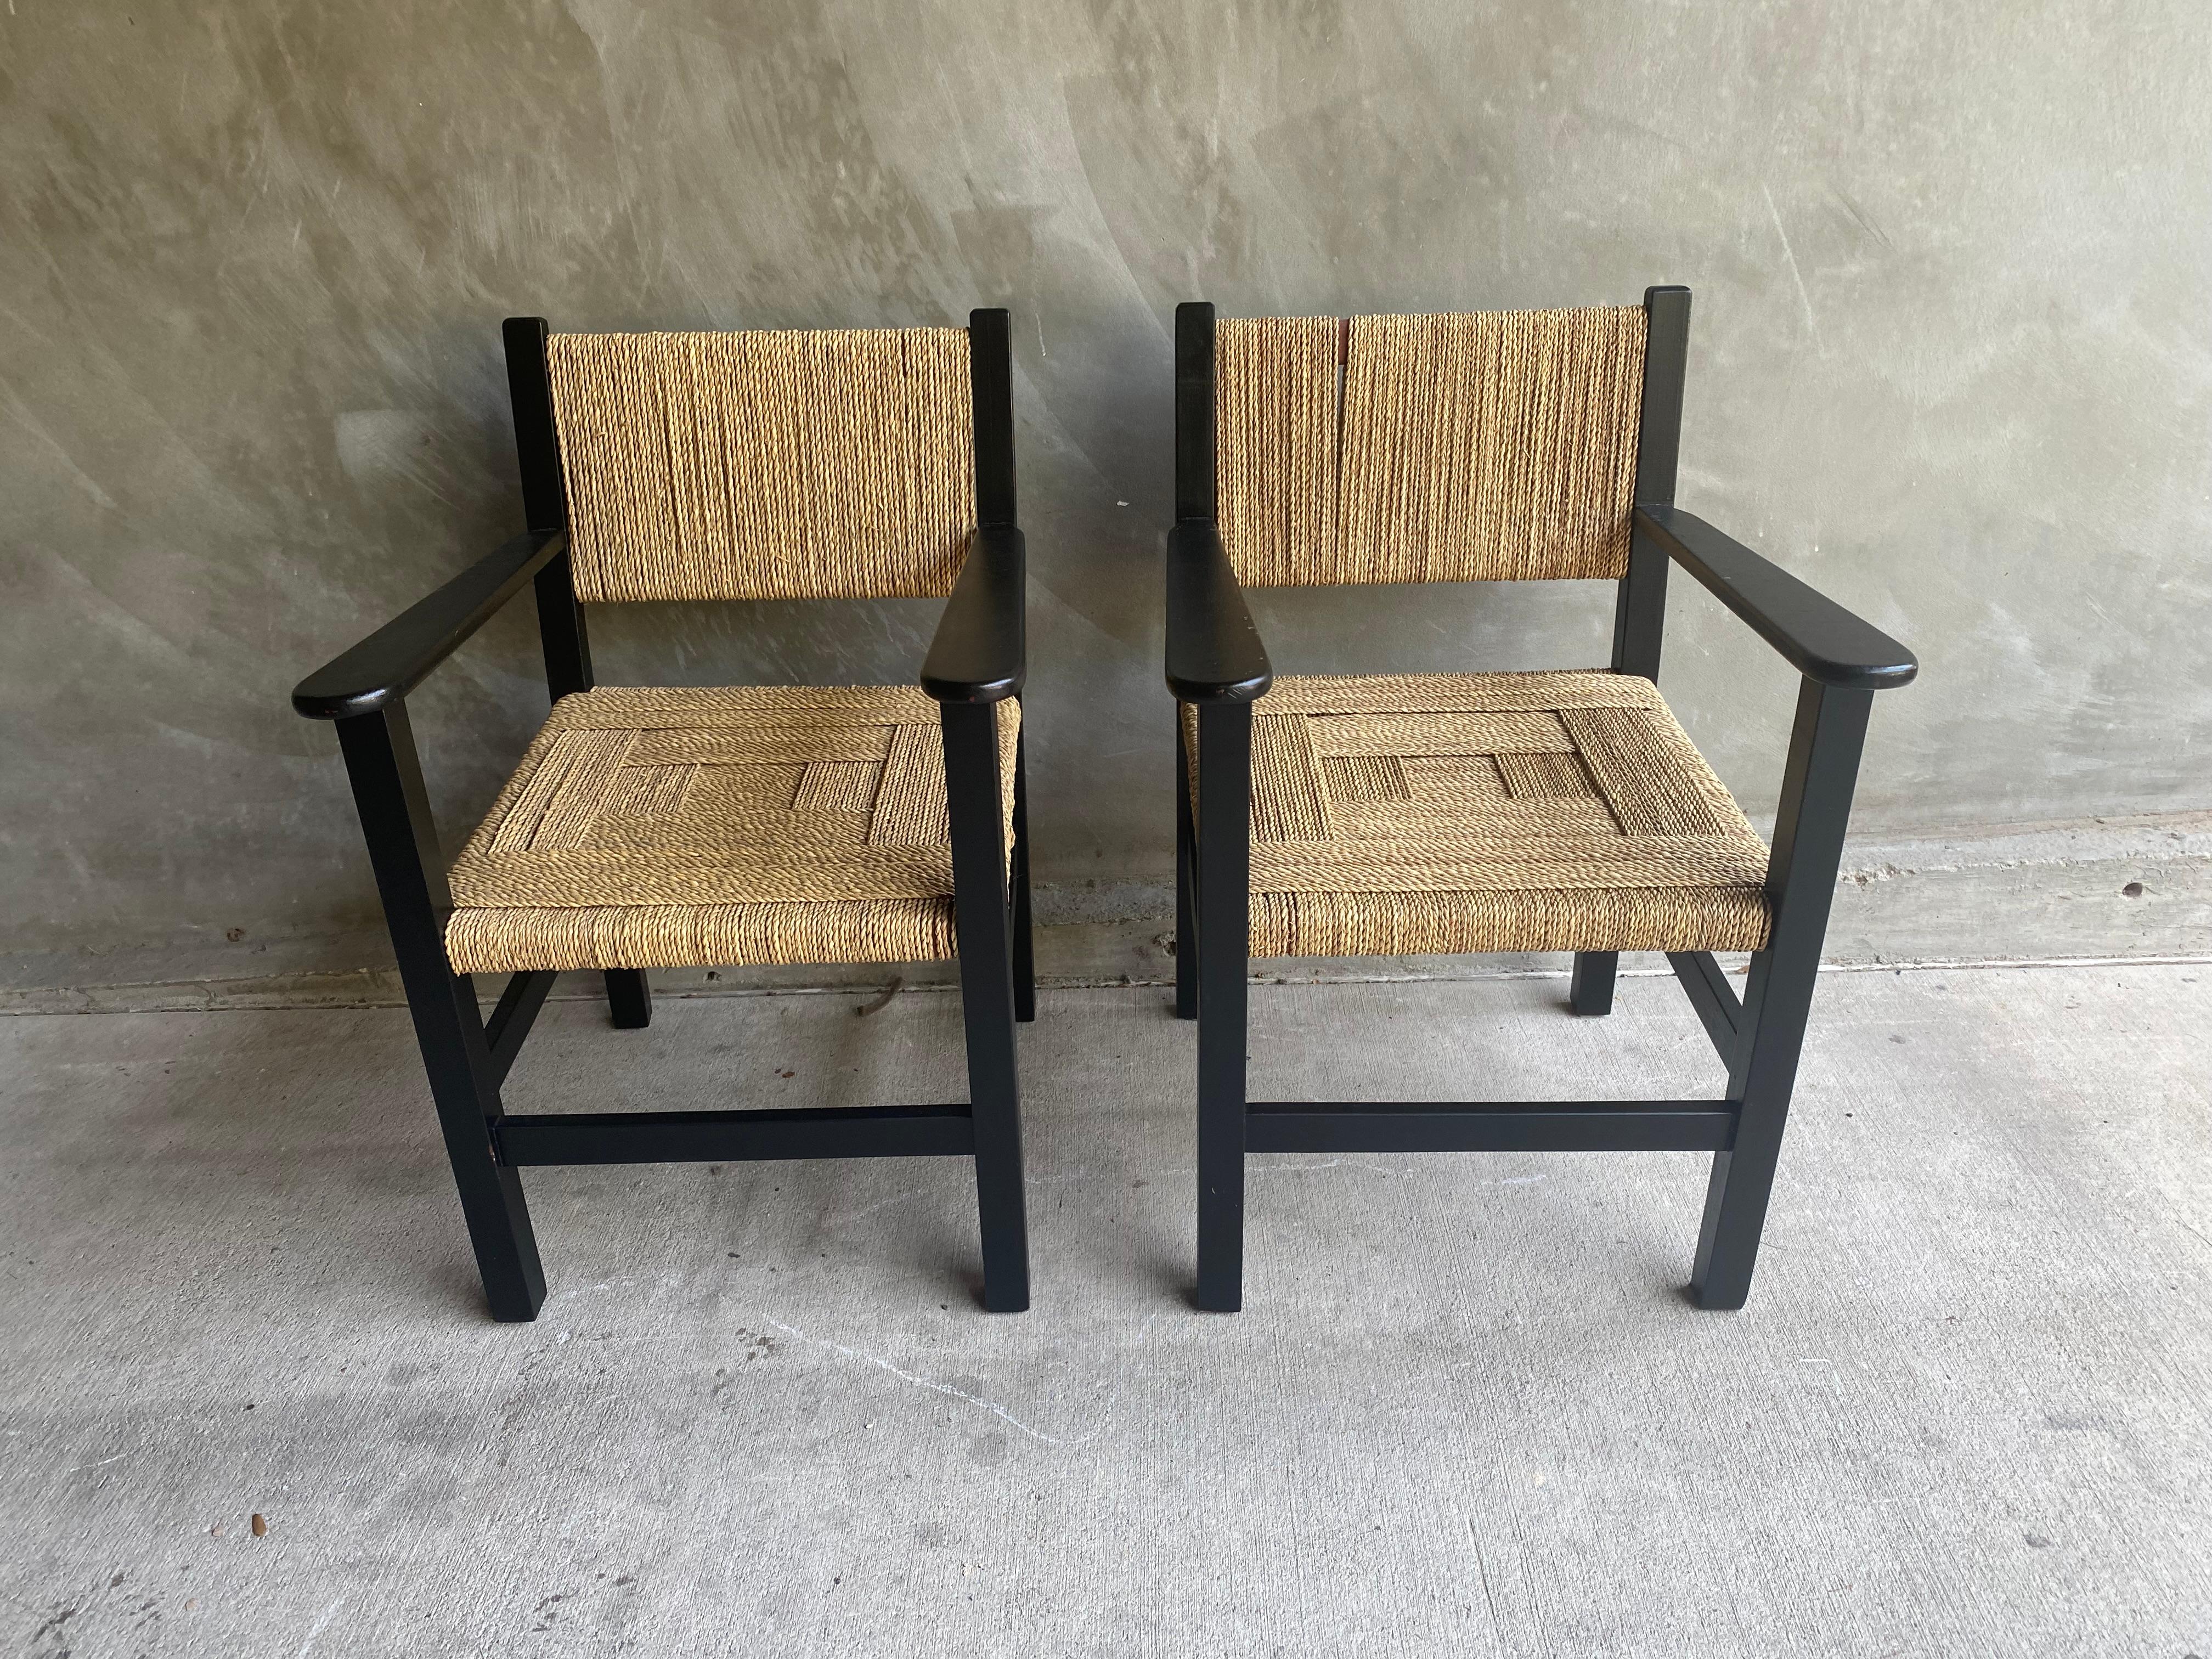 Handsome pair of black lacquered armchairs or side chairs with woven rope seats and backs, in the overall manner of Francis Jourdain and with woven rope in the style of Audoux & Minet. France, 1950's.